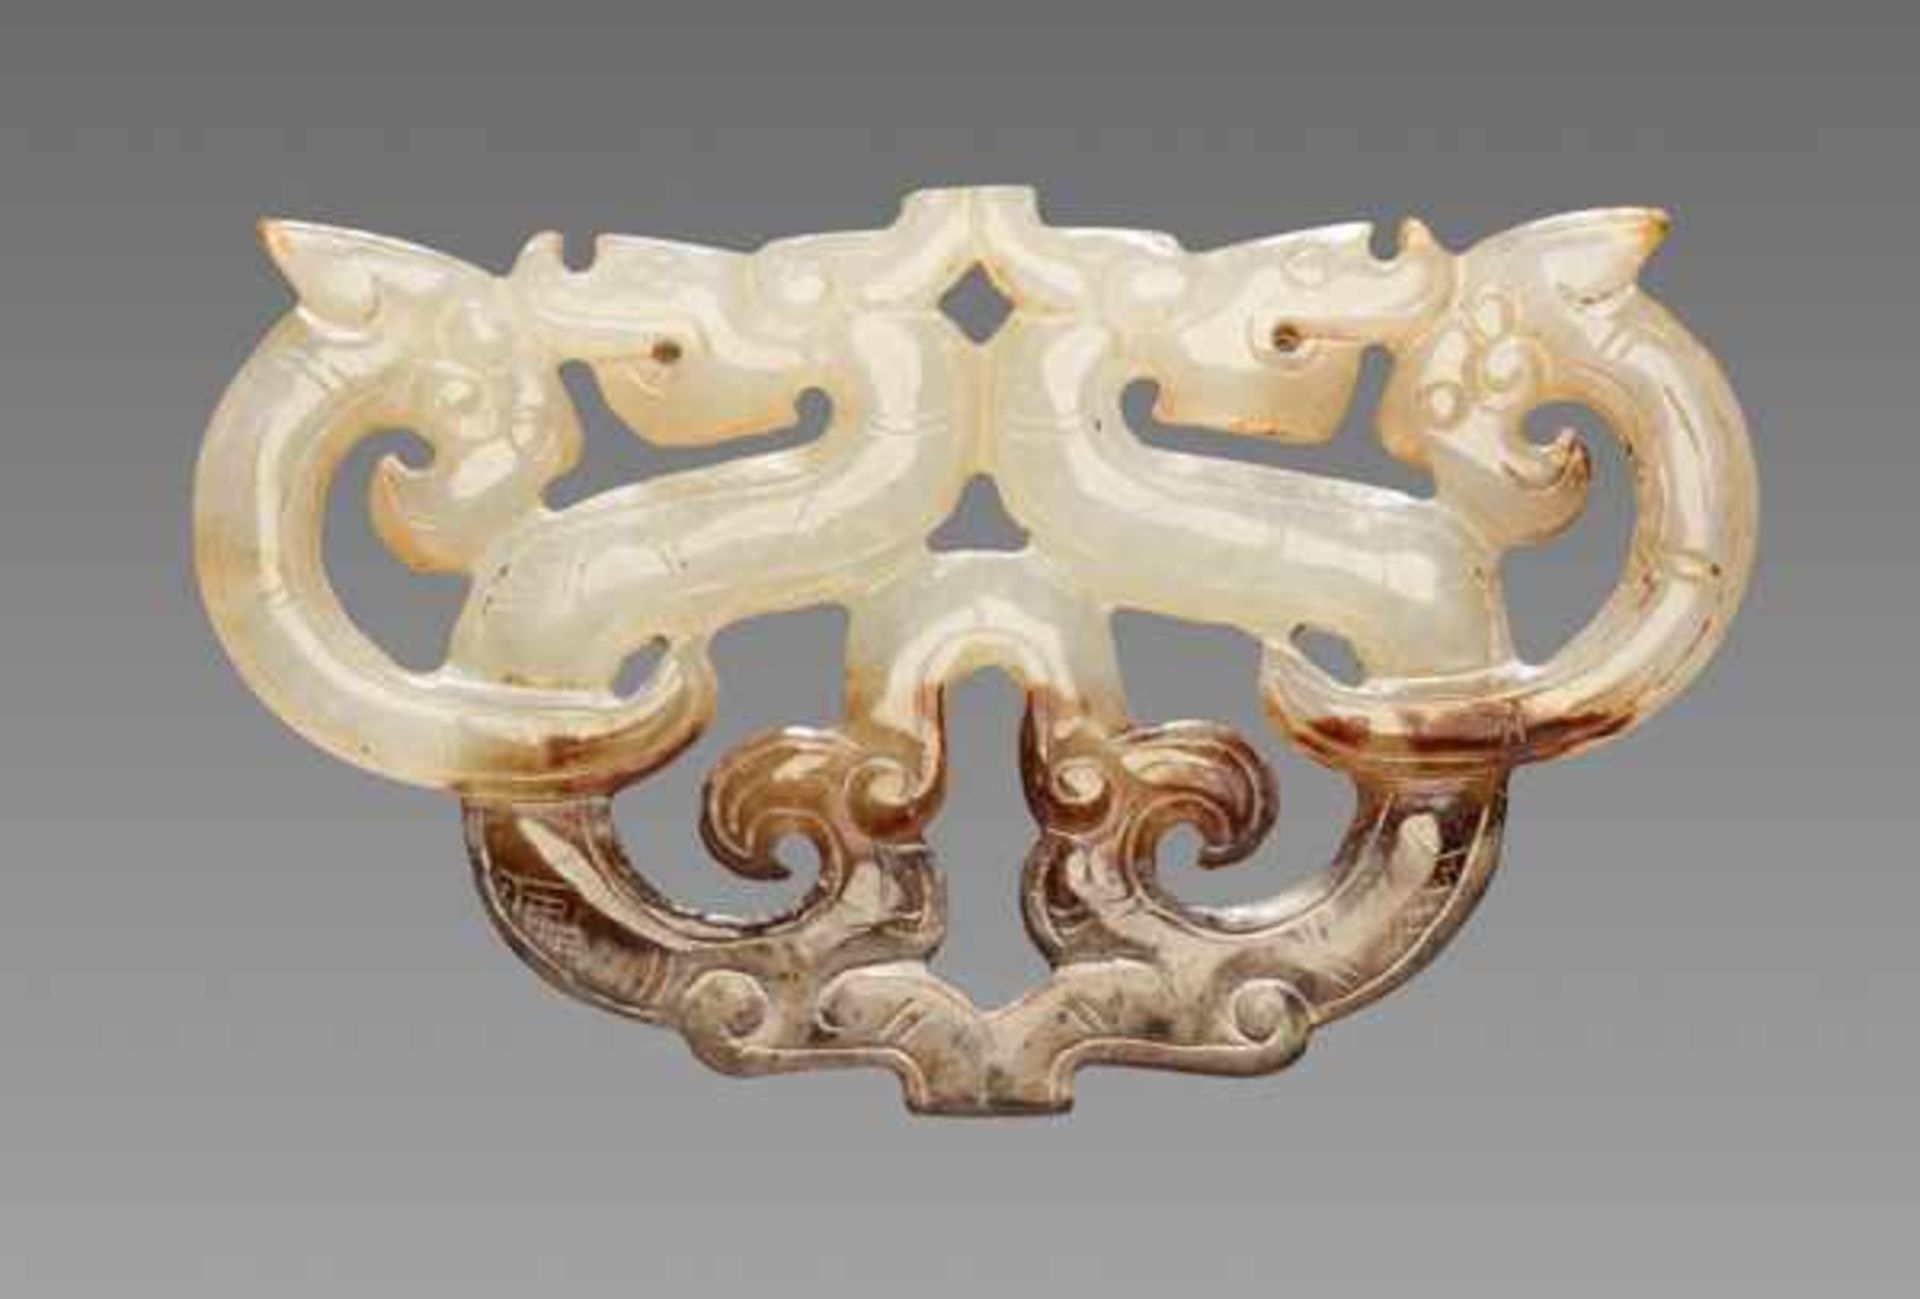 A GRACEFUL ORNAMENT IN OPENWORK WITH DRAGON AND PHOENIX MOTIF Jade, China. Eastern Zhou, Warring